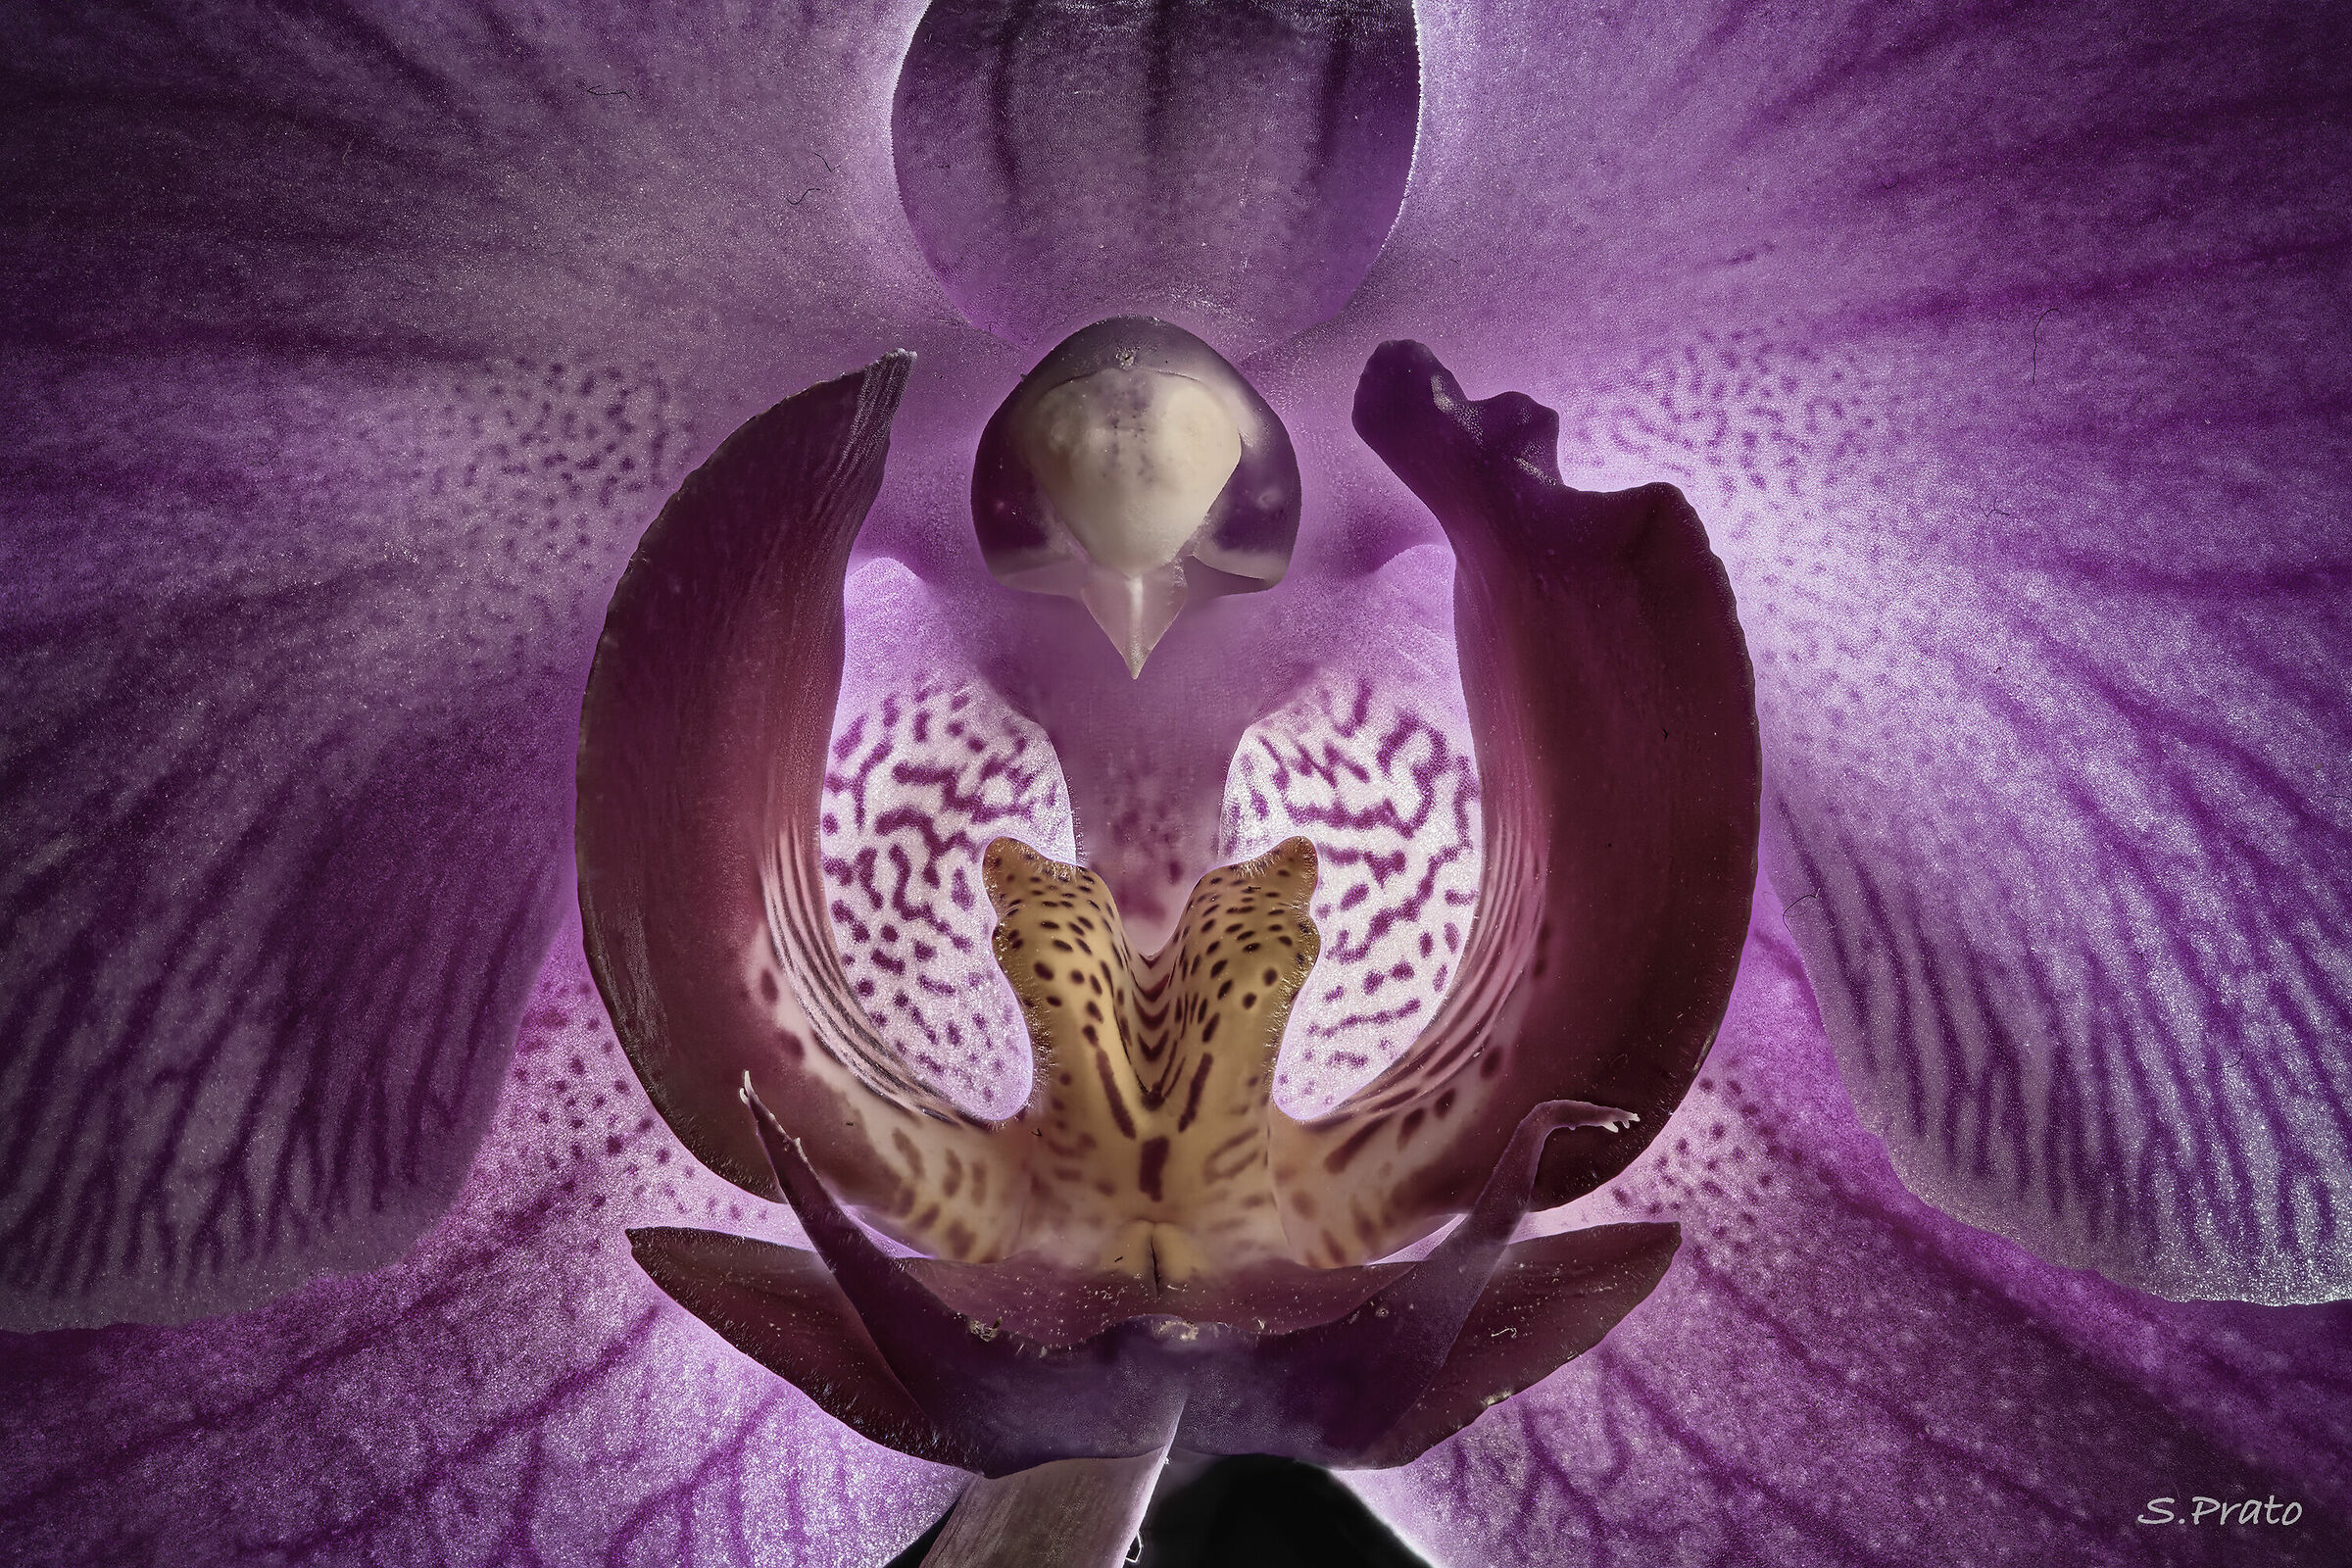 The mouth of the orchid...